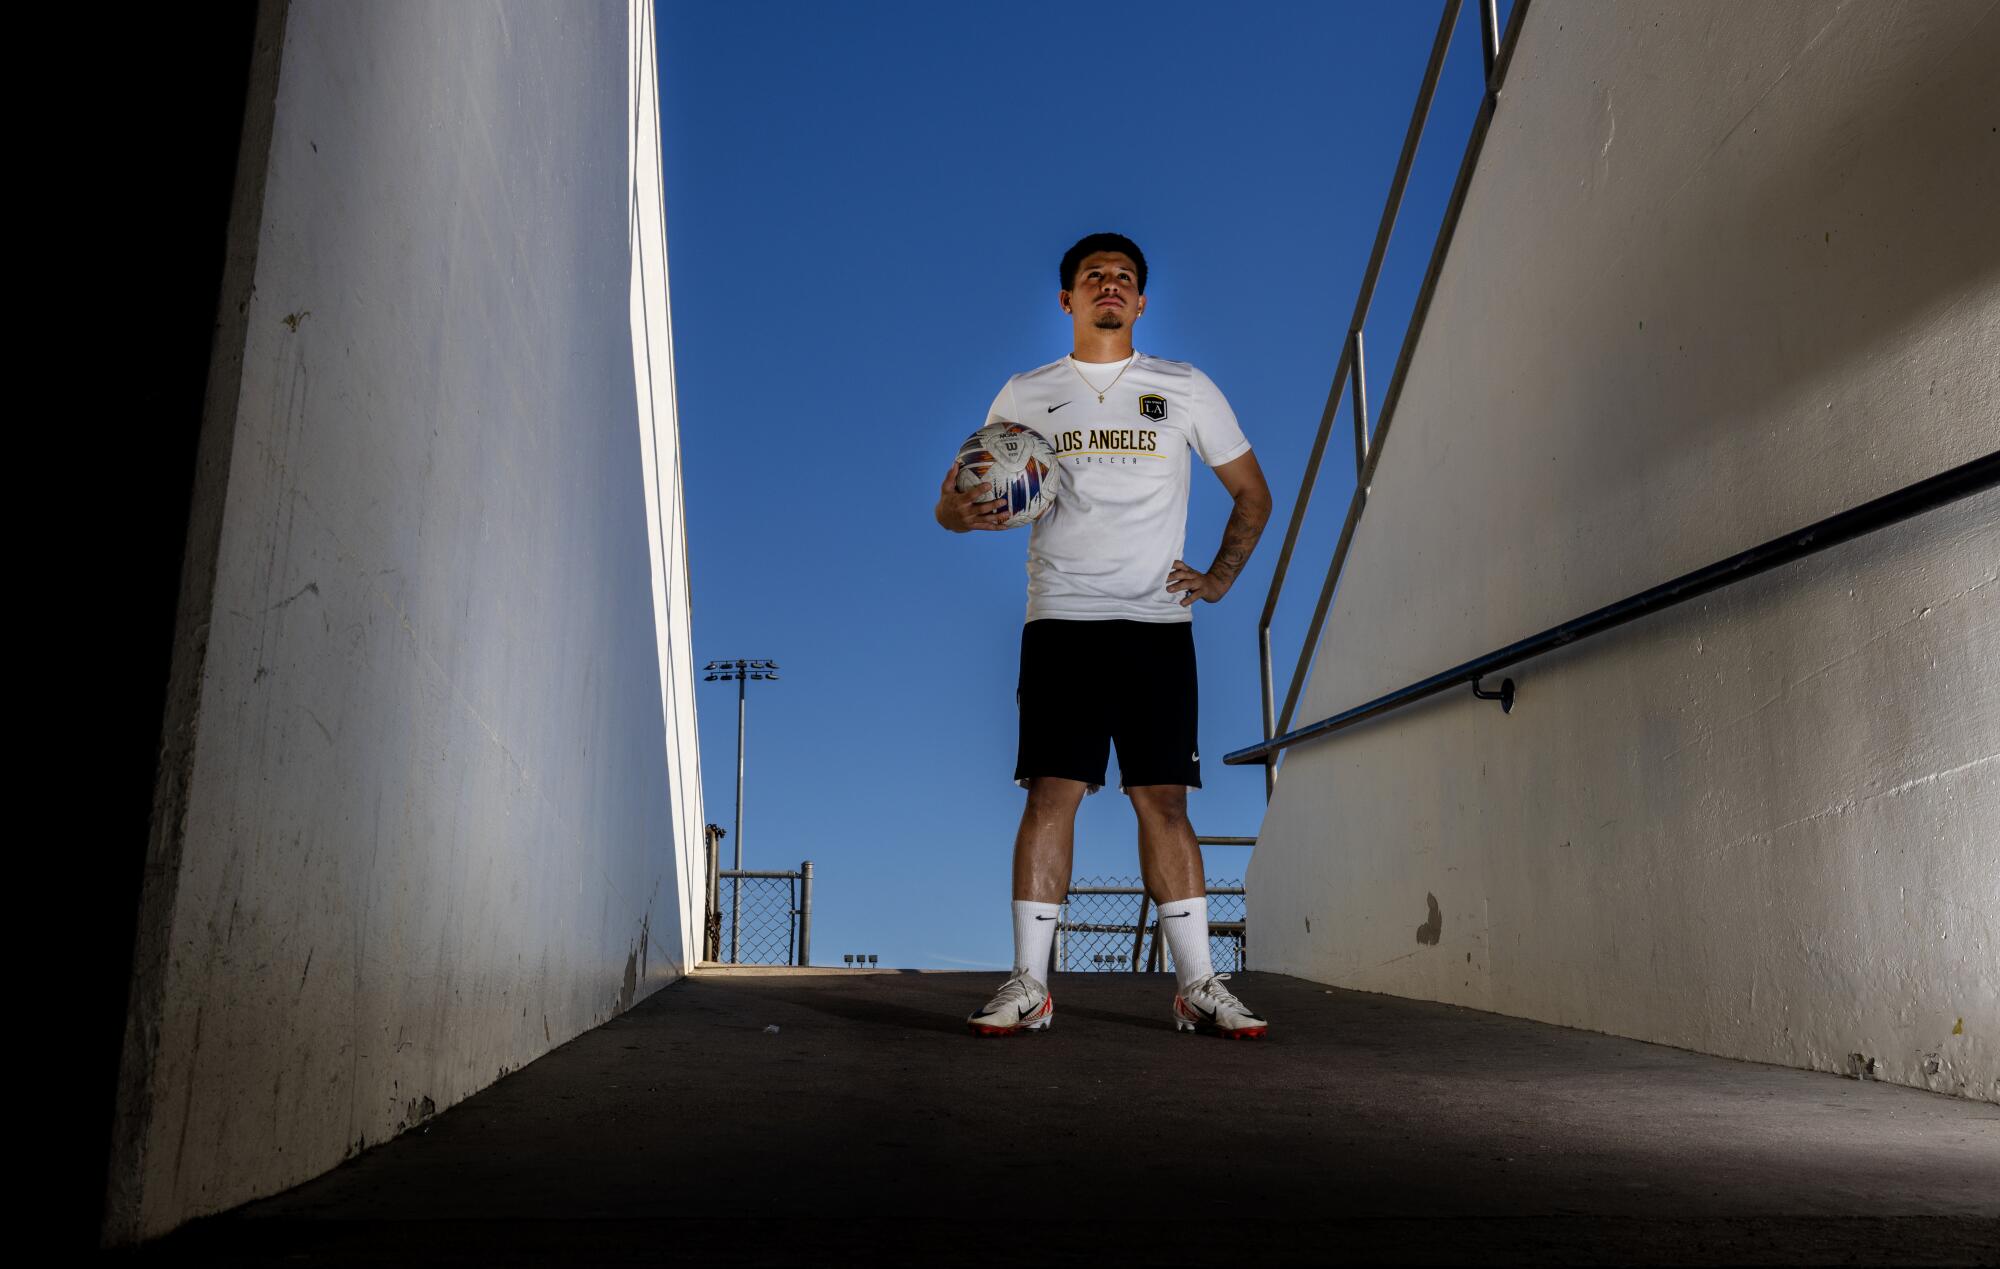 Bryan Ortega holds a soccer ball at Jesse Owens Stadium on the Cal State L.A. campus.